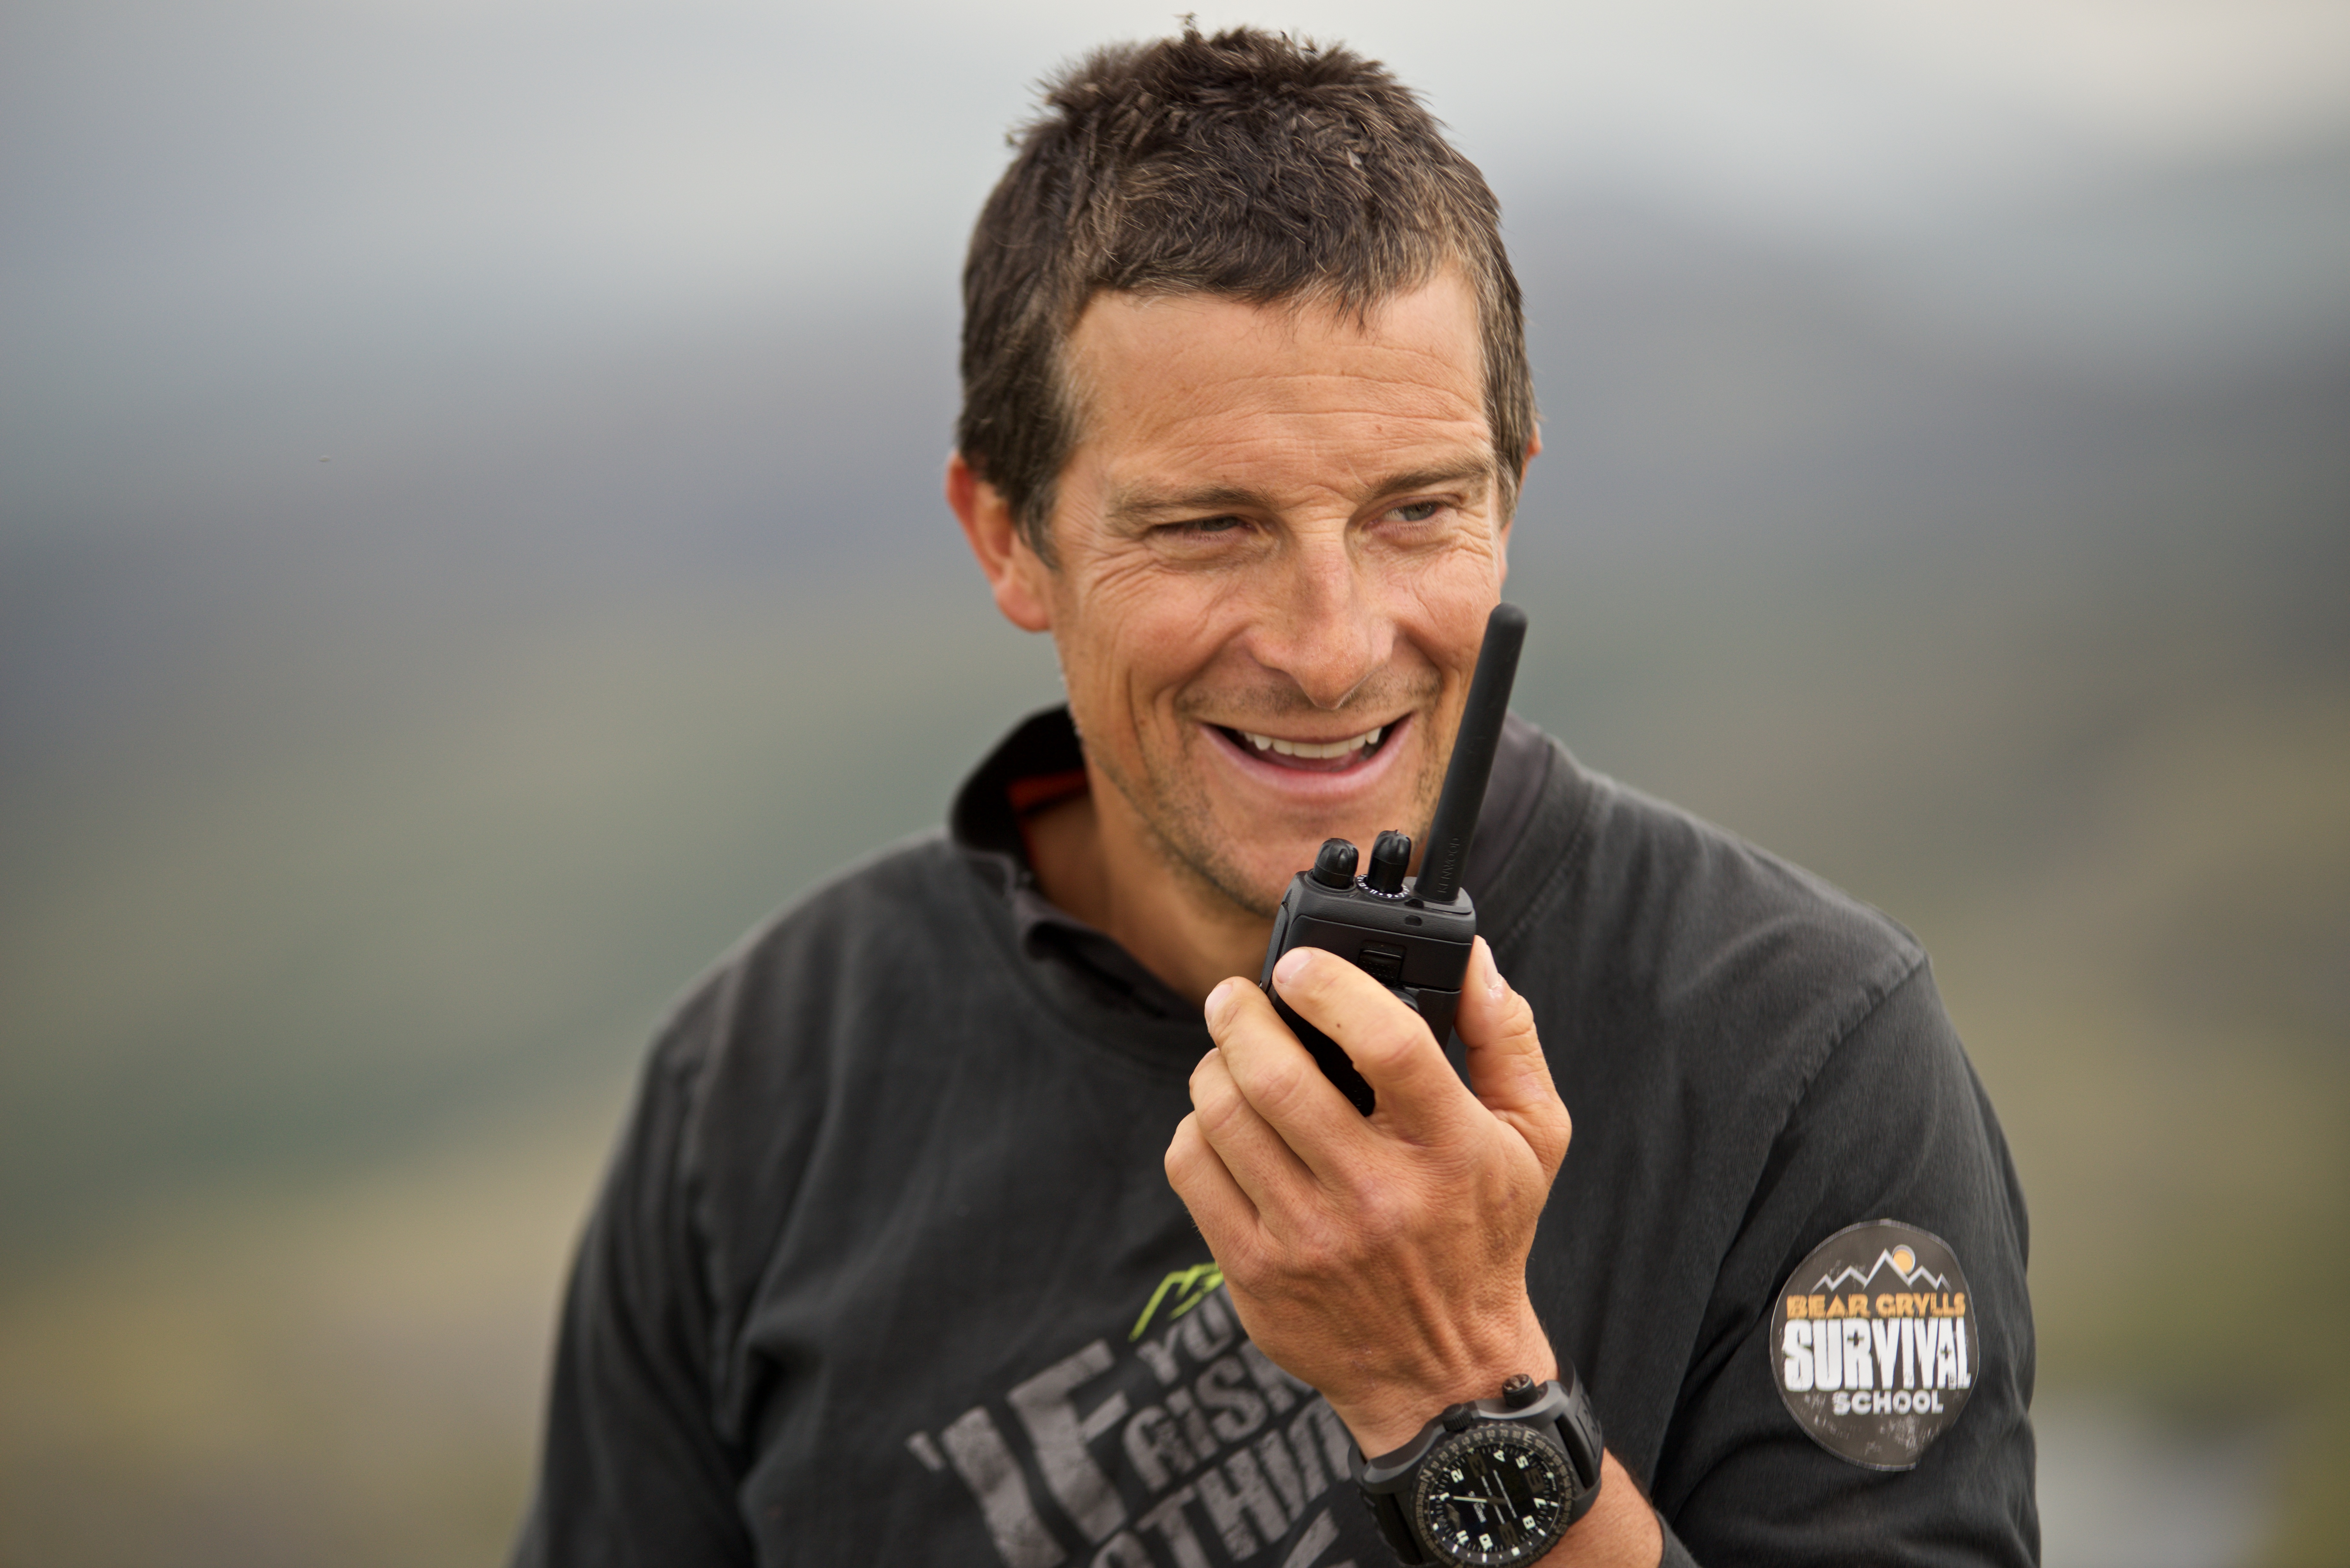 Successful PSB programmes include Bear Grylls Survival <a href=